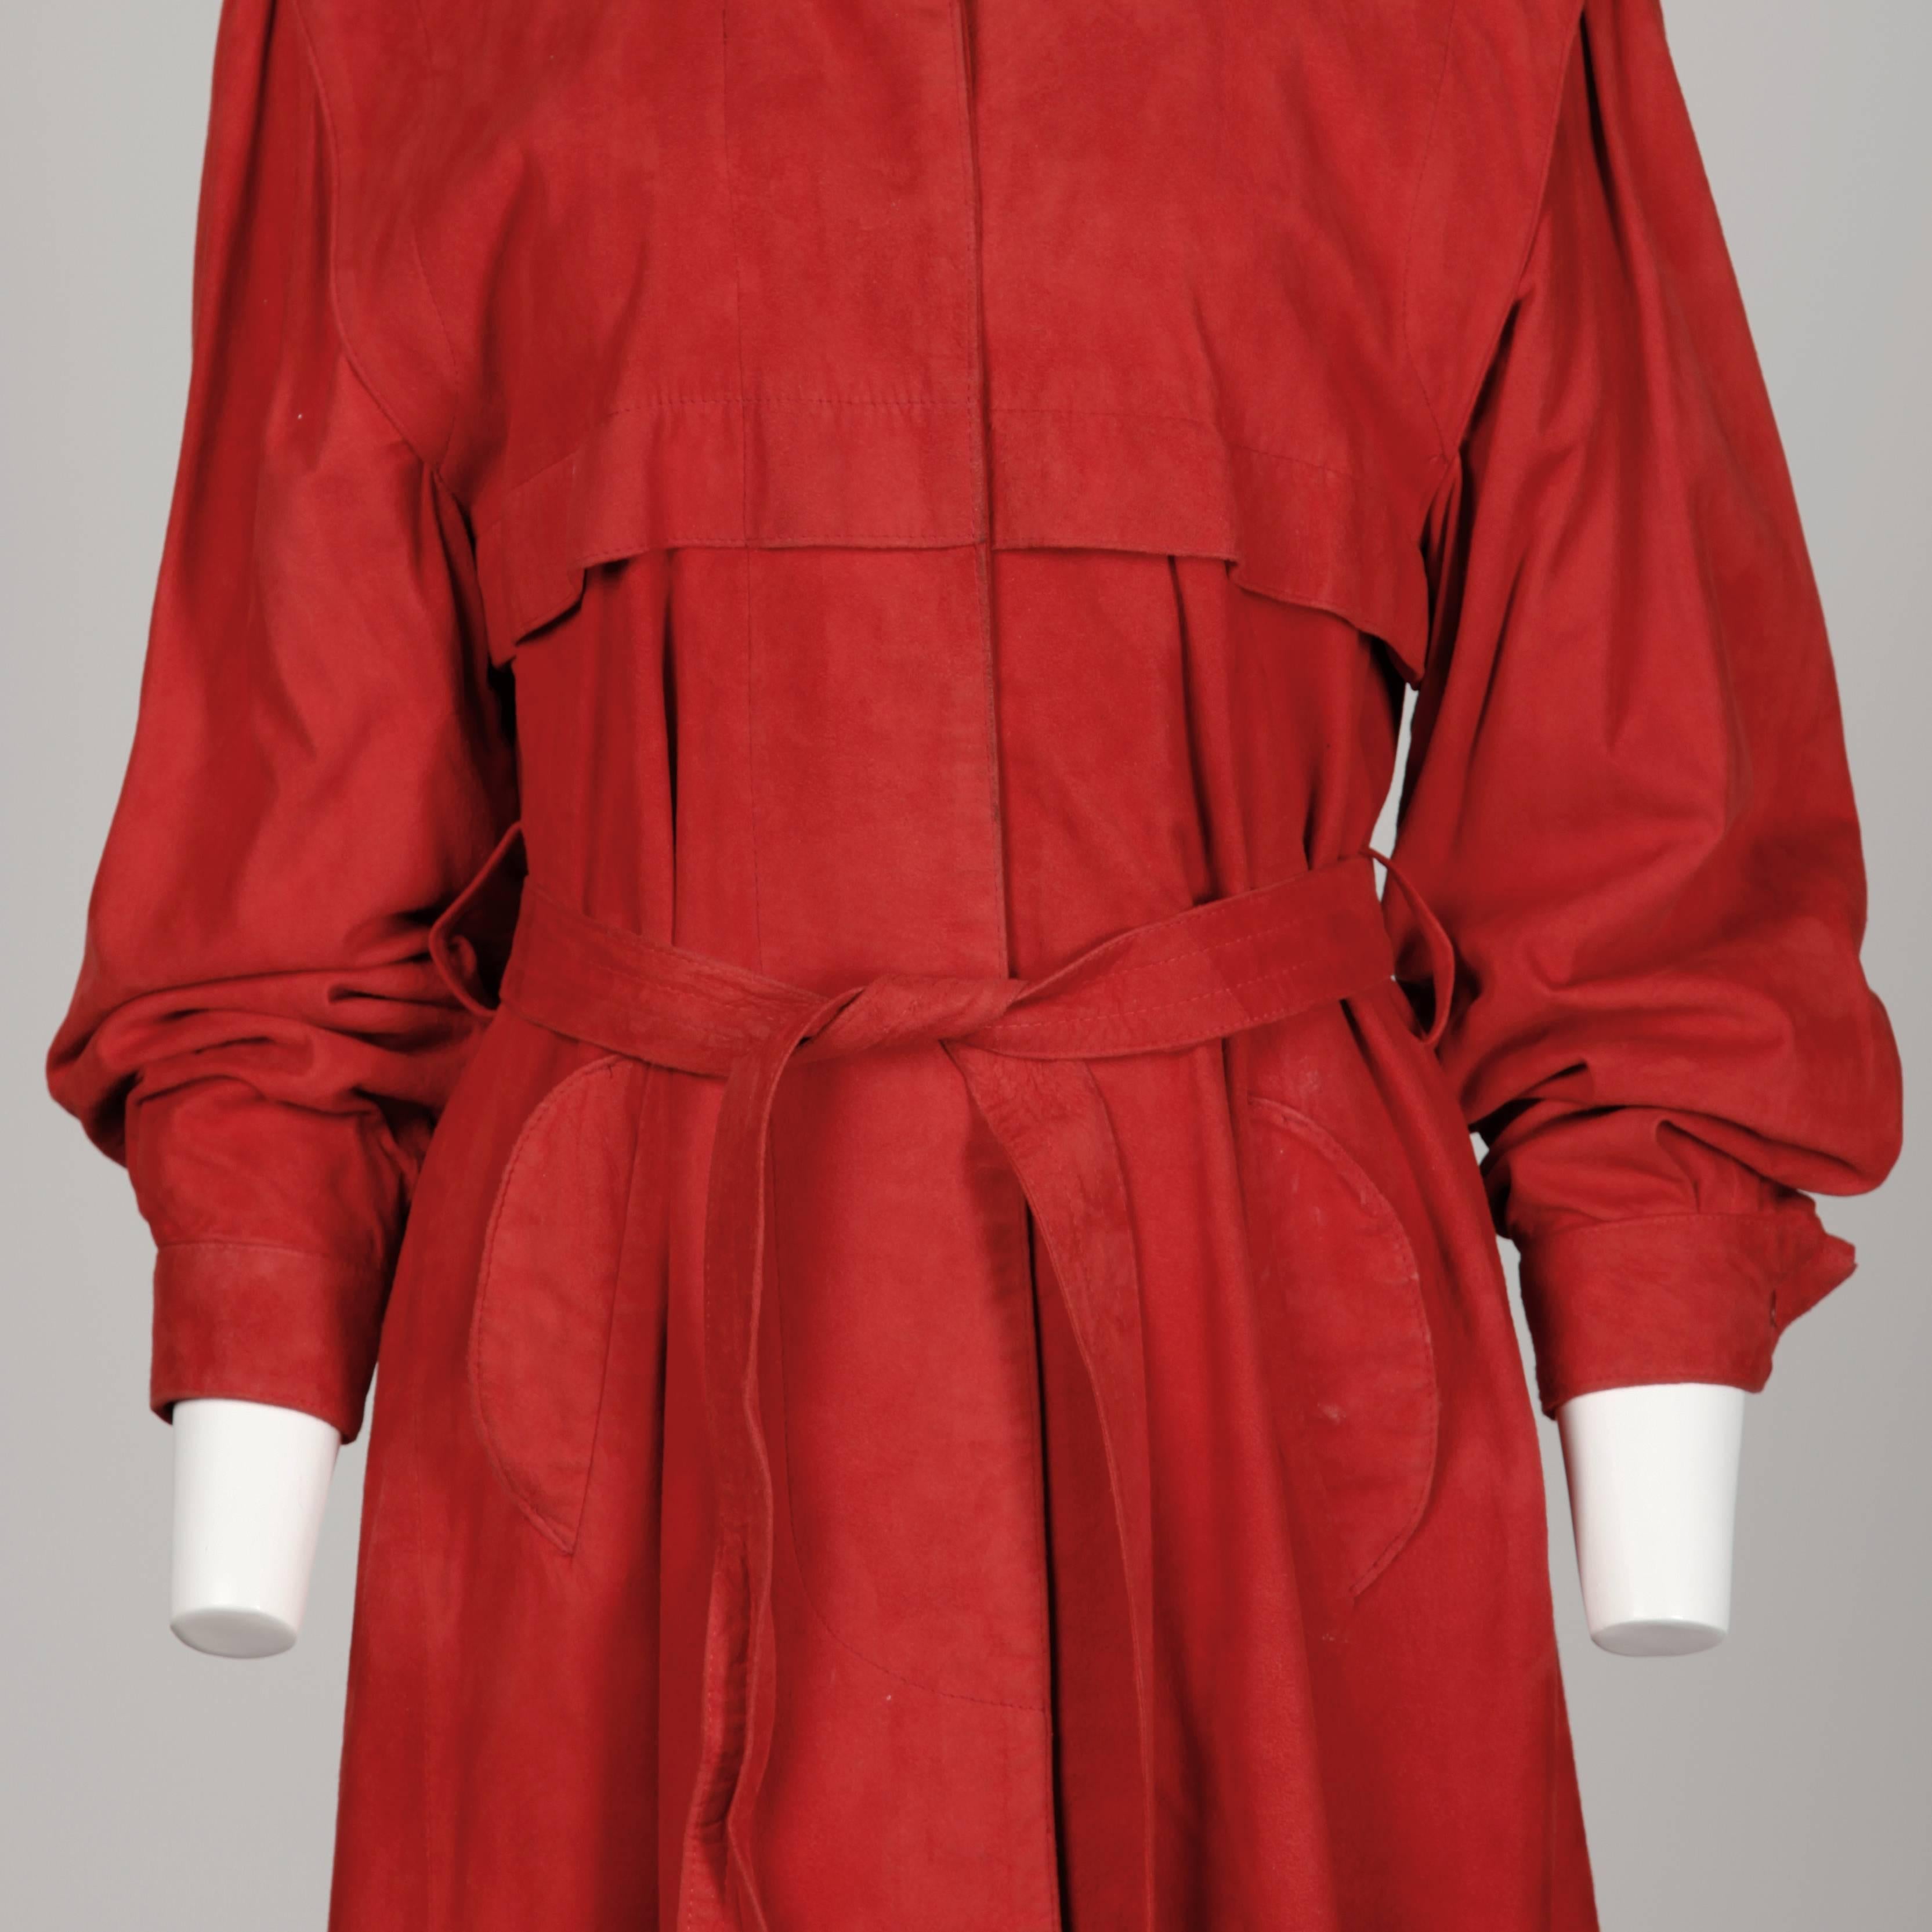 Fendi Vintage Red Suede Leather Trench Coat and Matching Sash Belt, 1990s 3